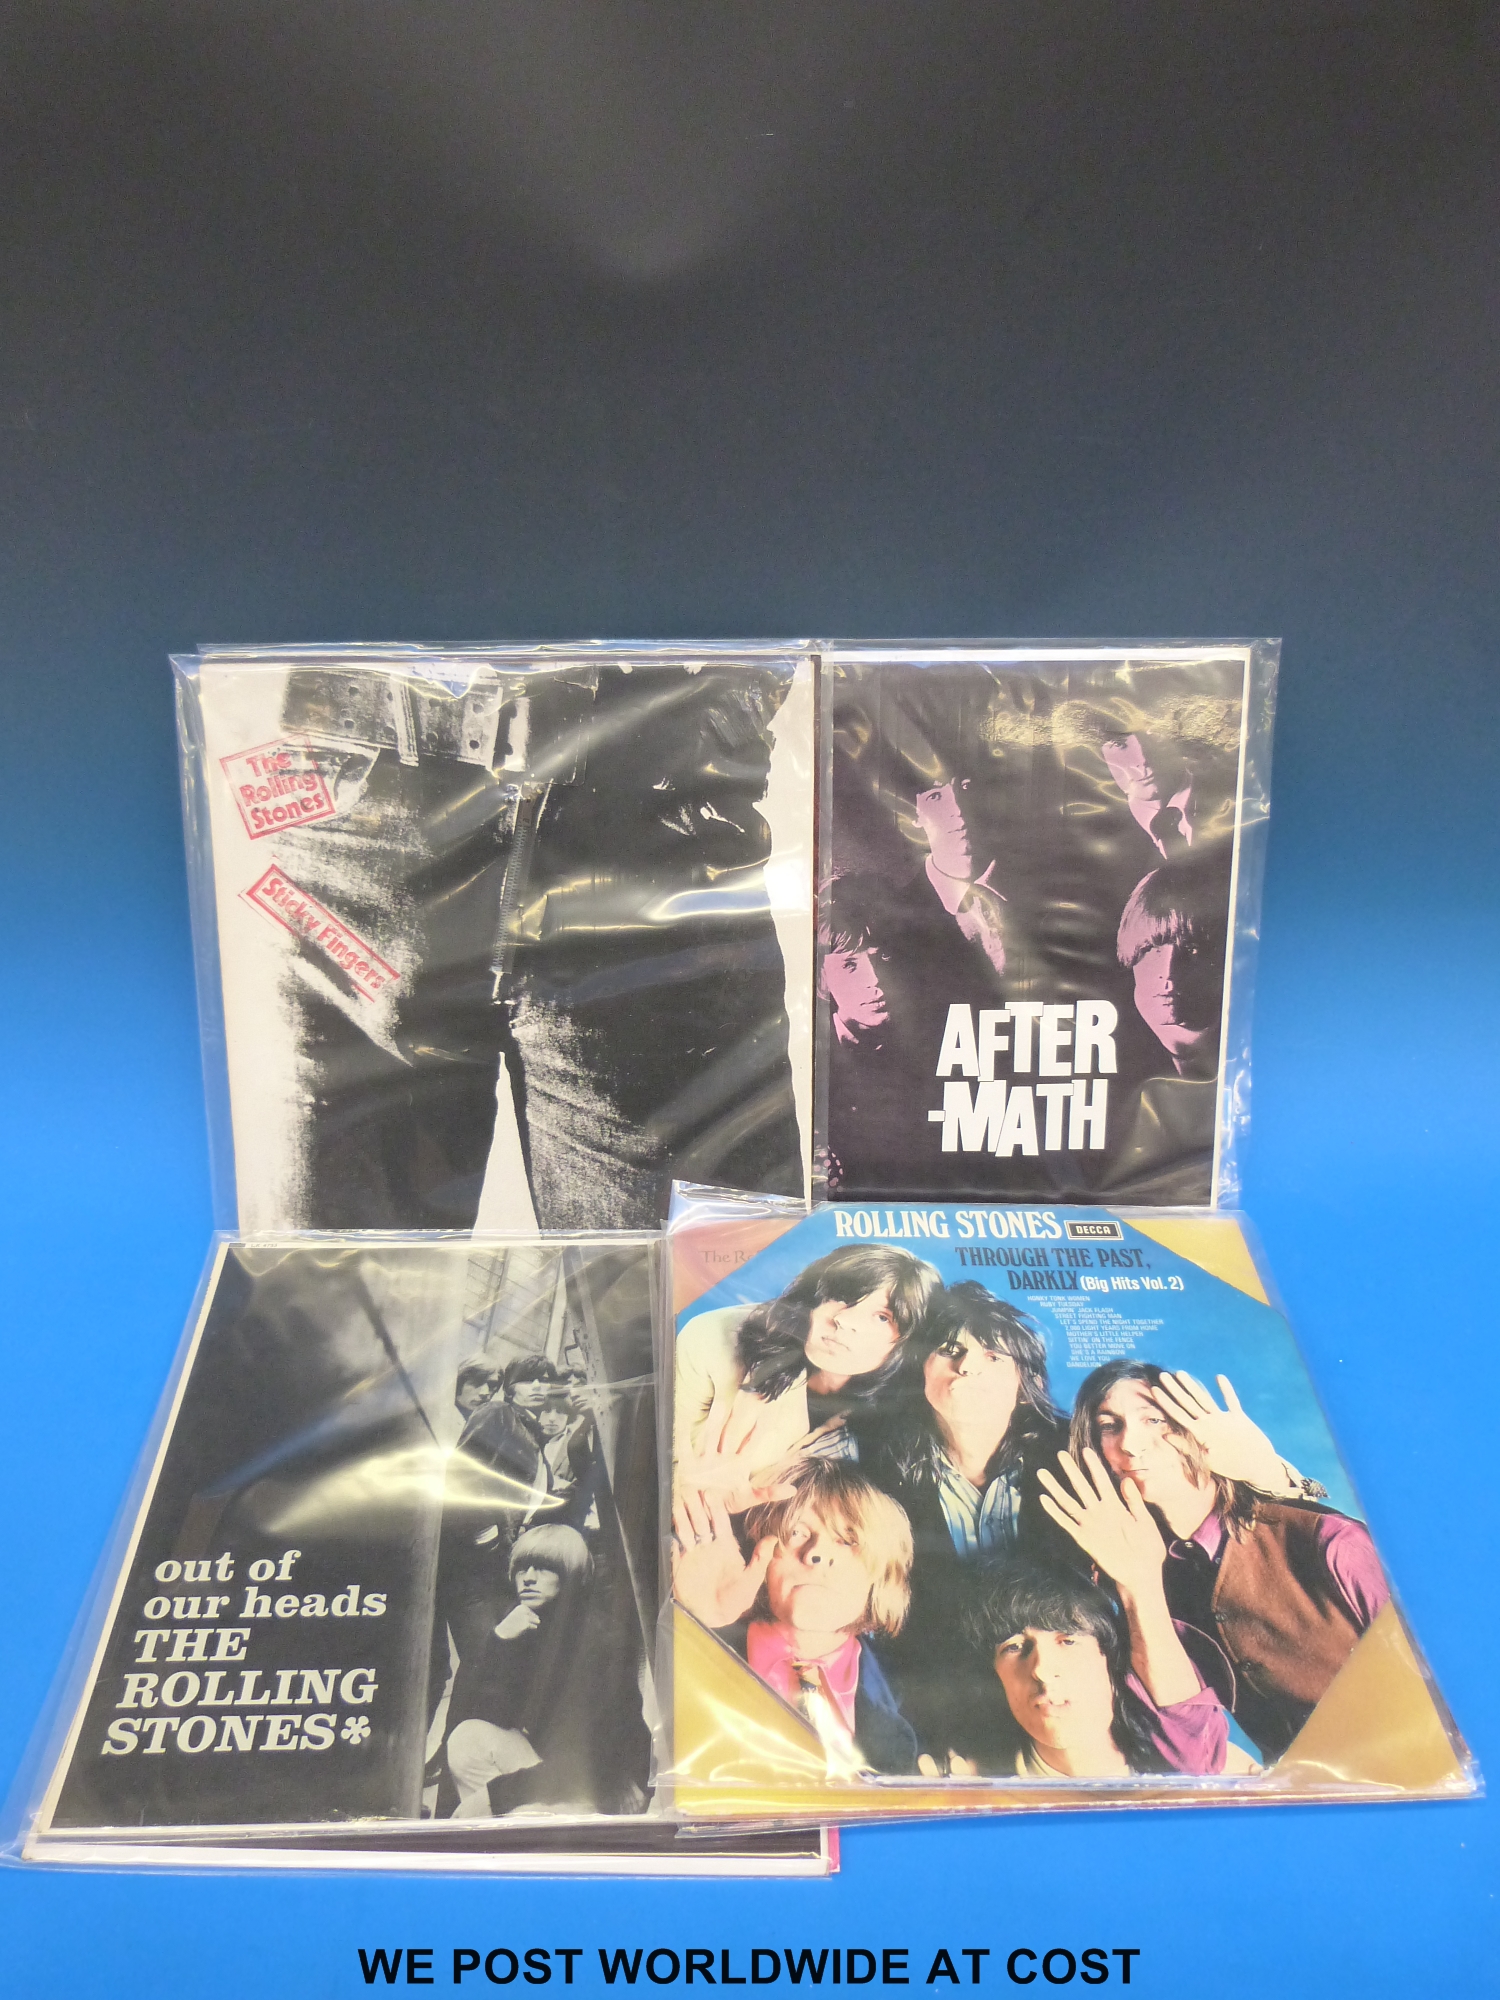 An excellent collection of 21x LPs and 3x EPs by The Rolling Stones.